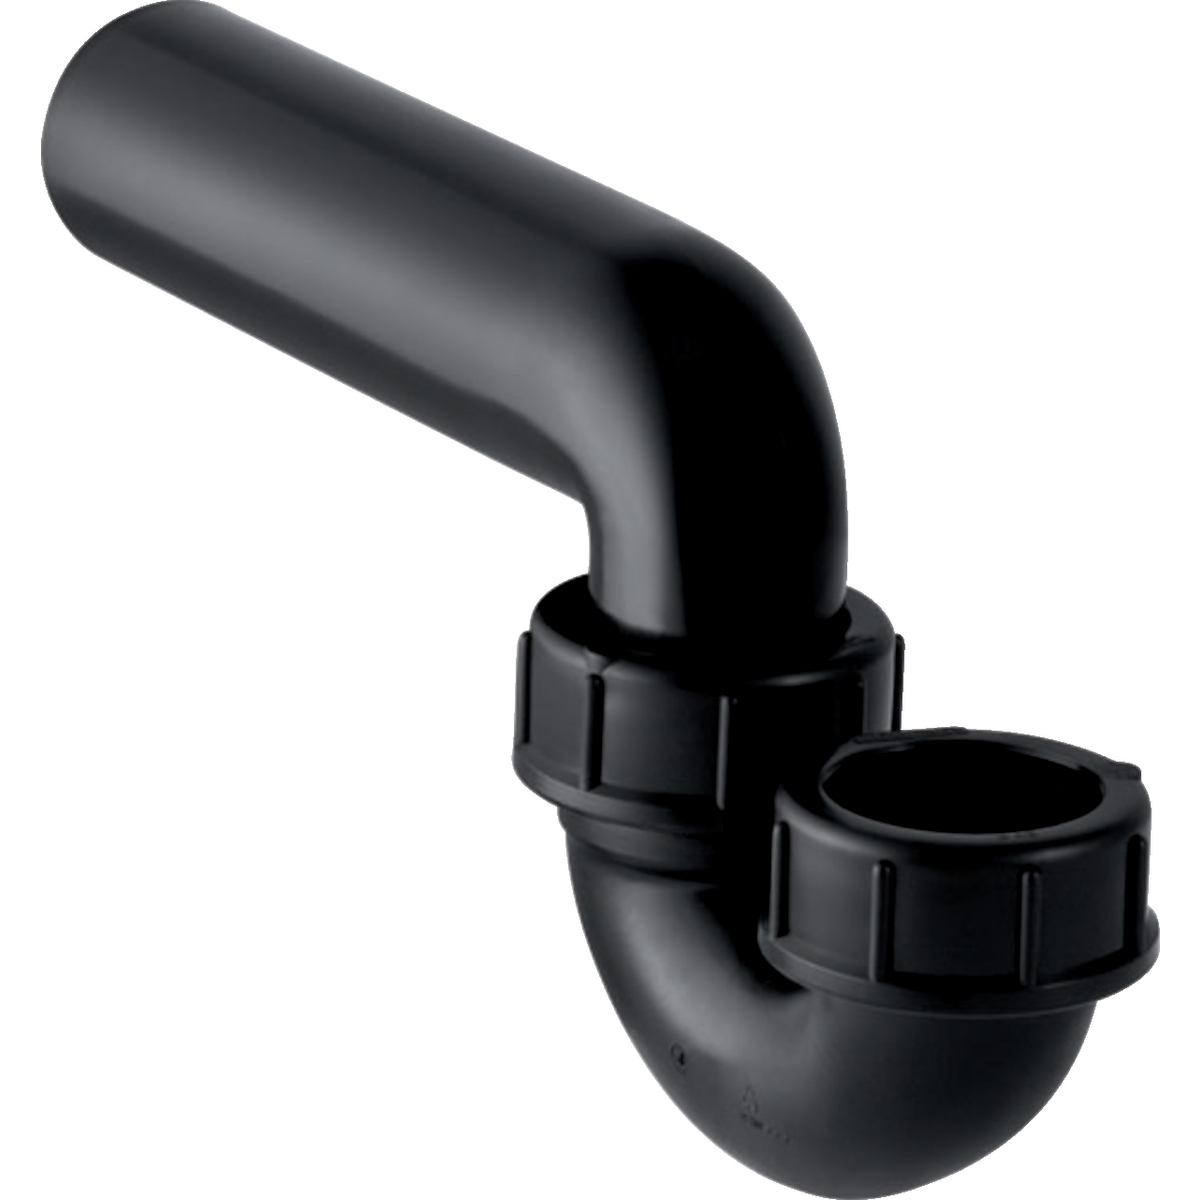 Geberit 152.043.16.1 P-Trap for Sink, with Compression Joint, Vertical Inlet and Horizontal Outlet: D=50Mm, D1=56Mm - Black